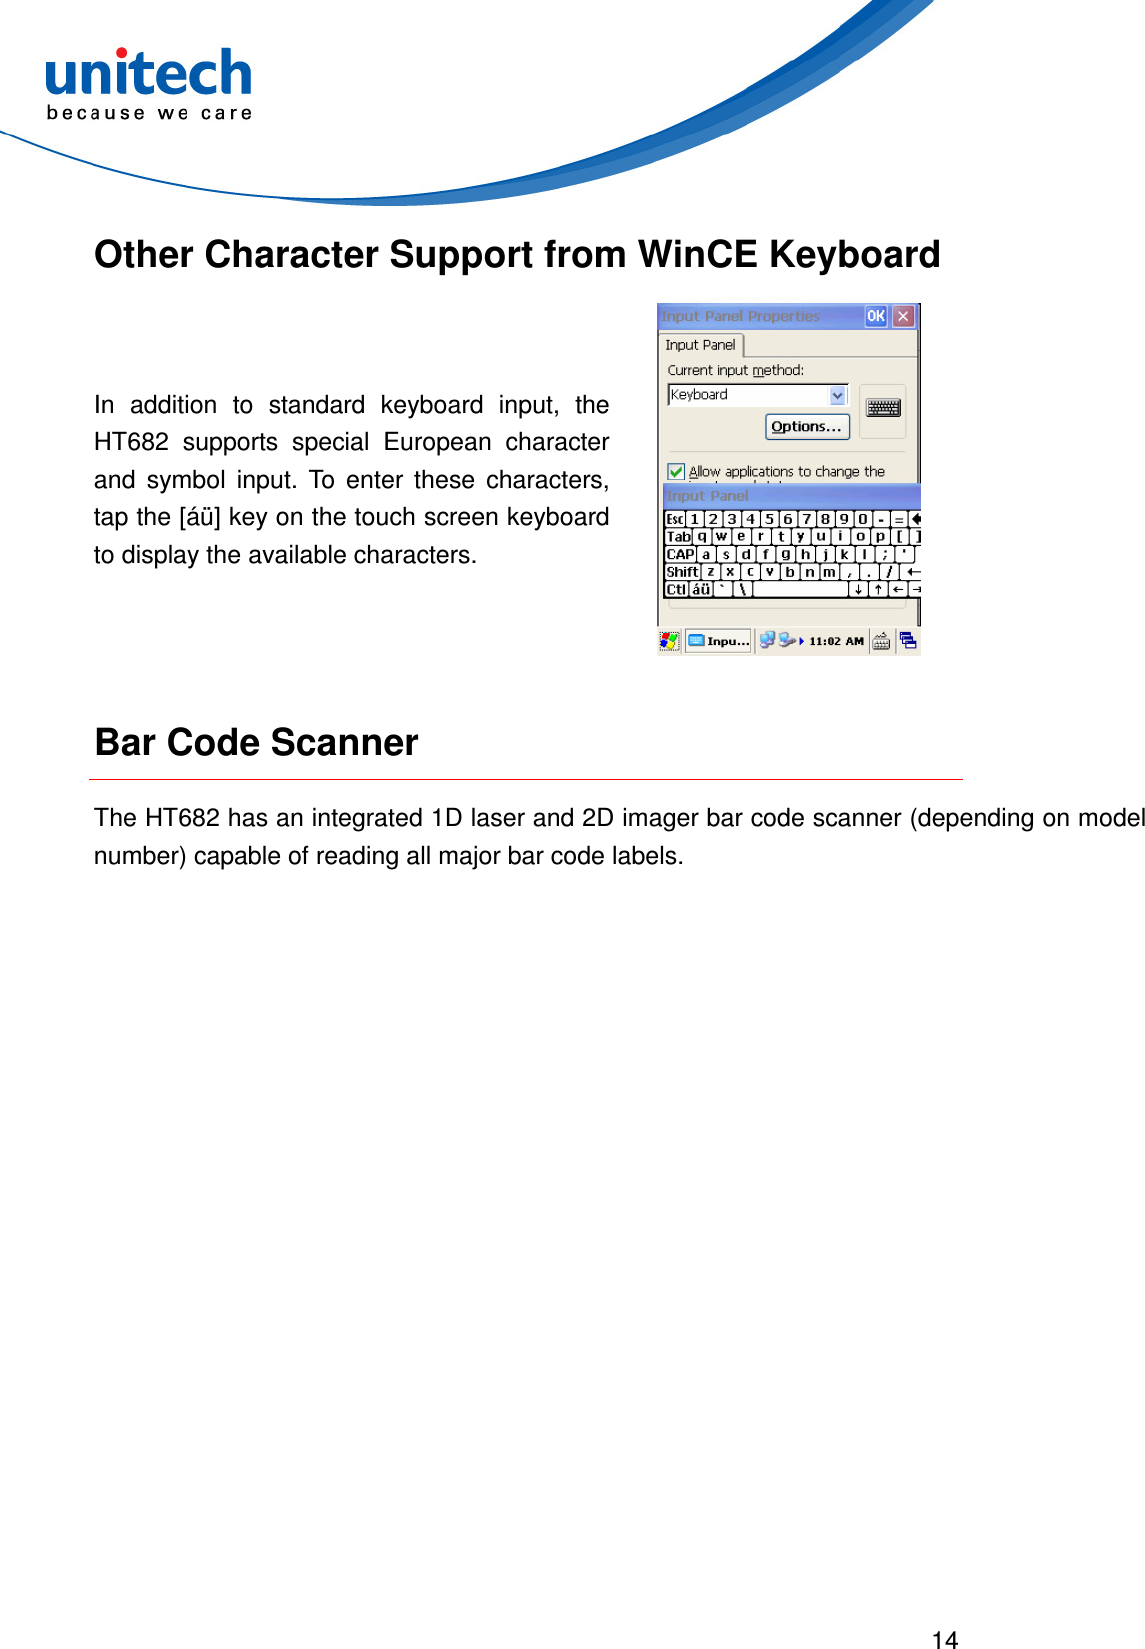  14  Other Character Support from WinCE Keyboard In  addition  to  standard  keyboard  input,  the HT682  supports  special  European  character and  symbol  input.  To  enter  these  characters, tap the [áü] key on the touch screen keyboard to display the available characters.   Bar Code Scanner The HT682 has an integrated 1D laser and 2D imager bar code scanner (depending on model number) capable of reading all major bar code labels. 